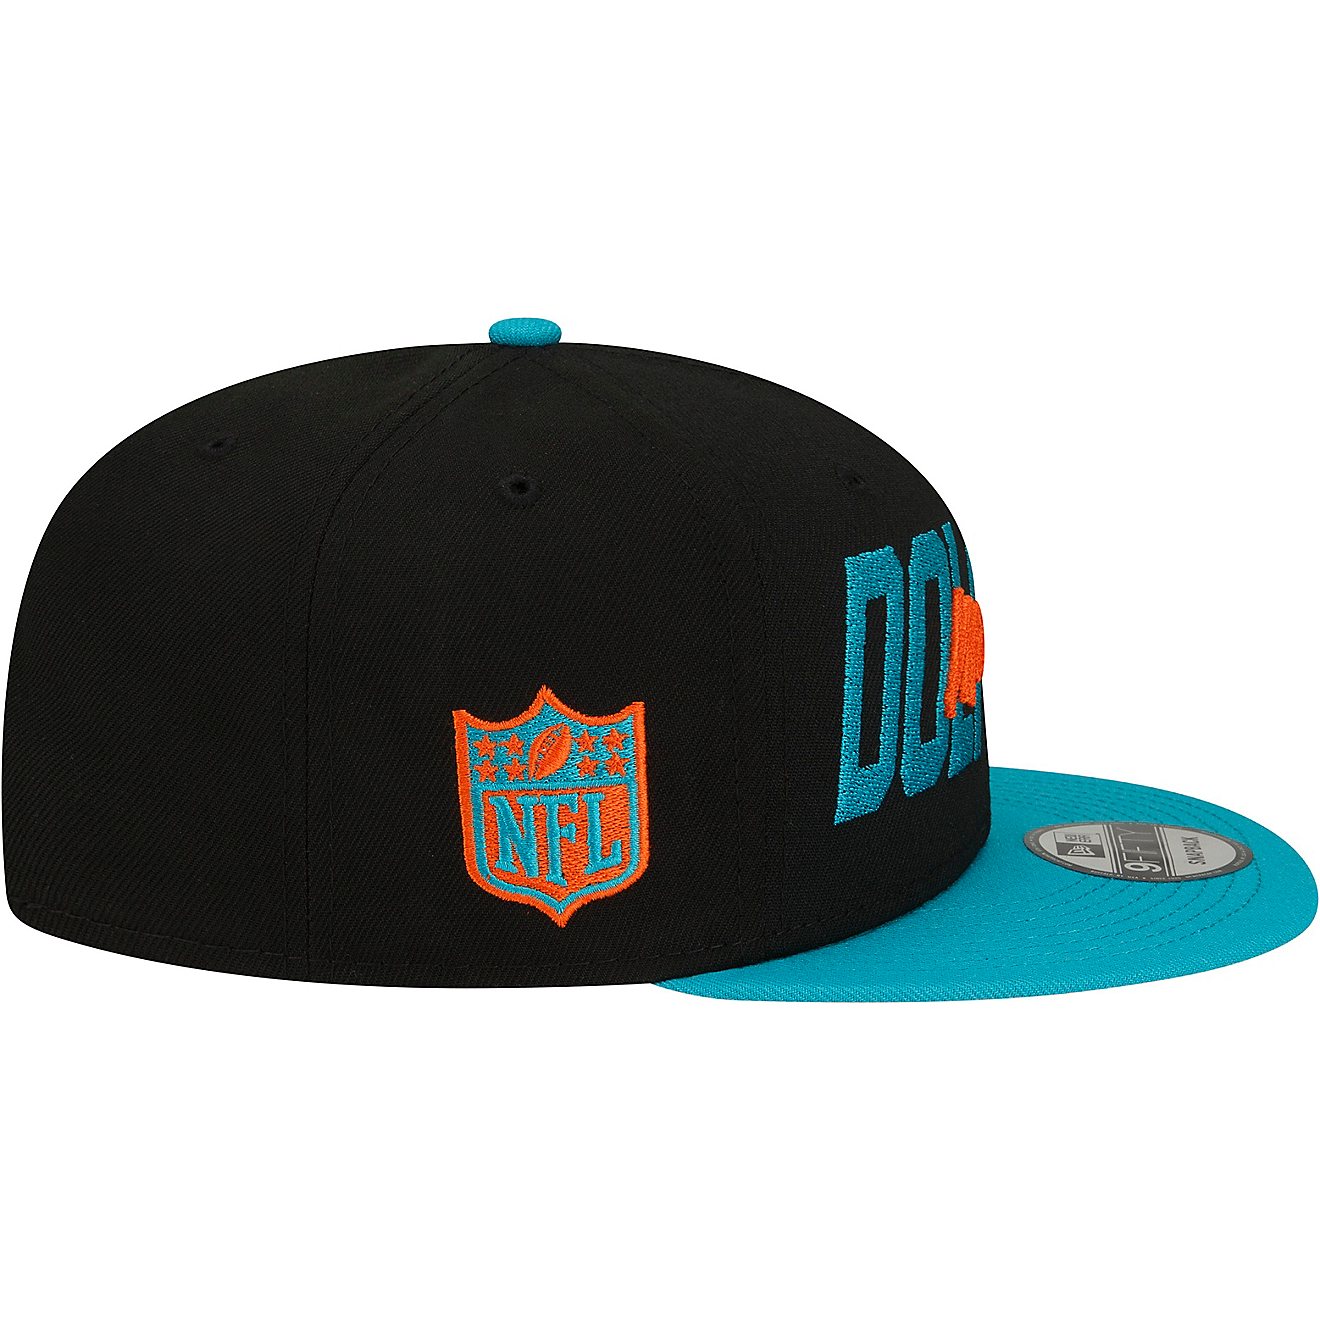 New Era Men's Miami Dolphins NFL Draft 22 9FIFTY Cap                                                                             - view number 6